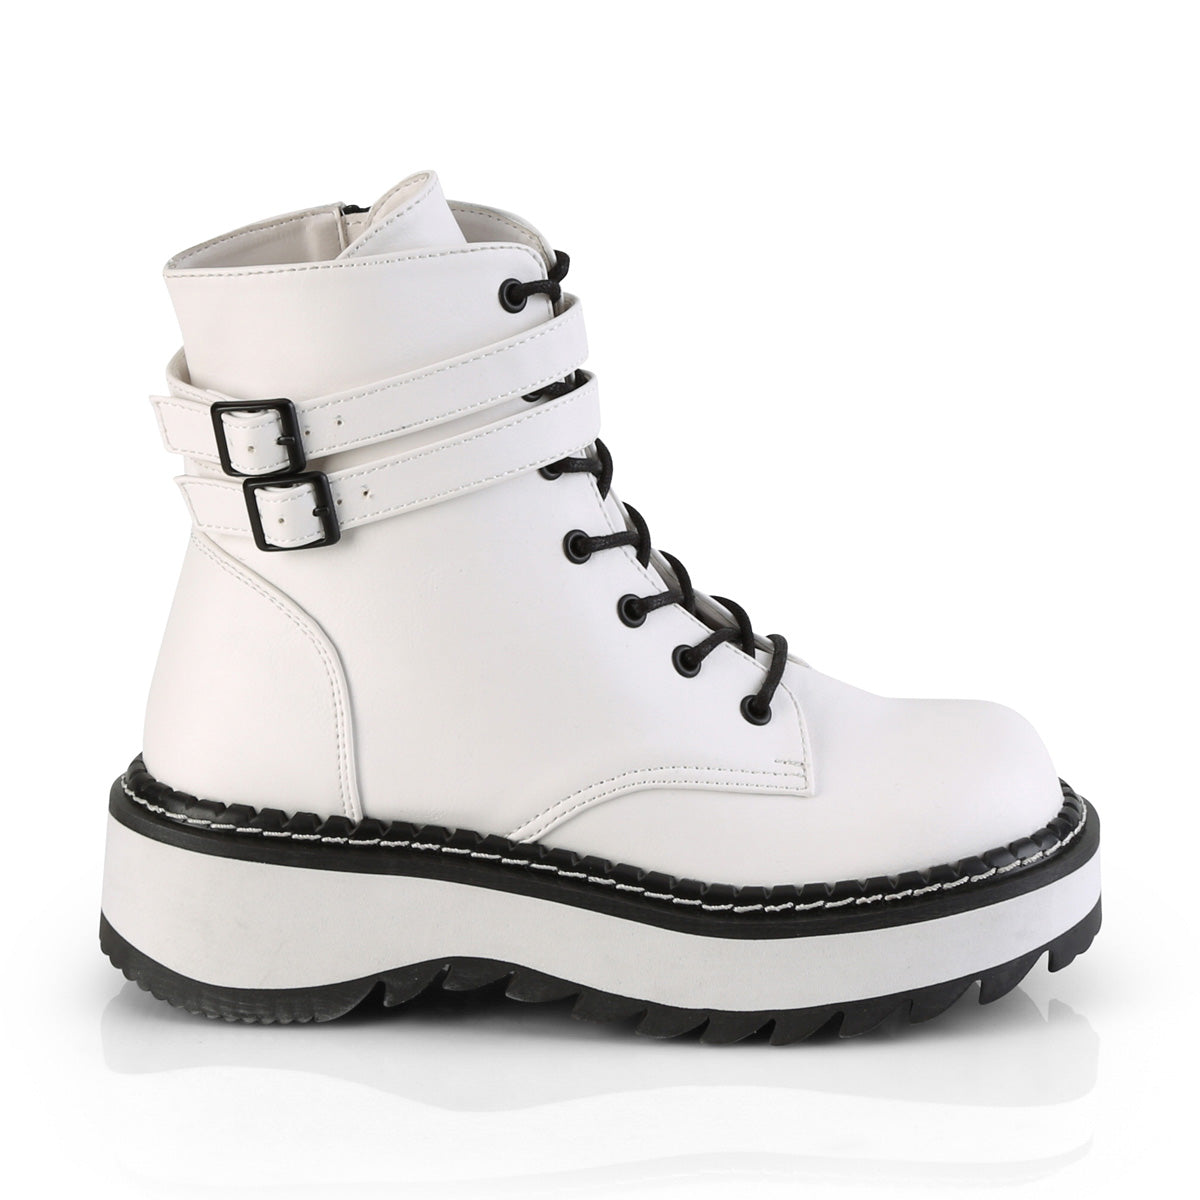 LILITH-152 White Vegan Leather Ankle Boot Demonia